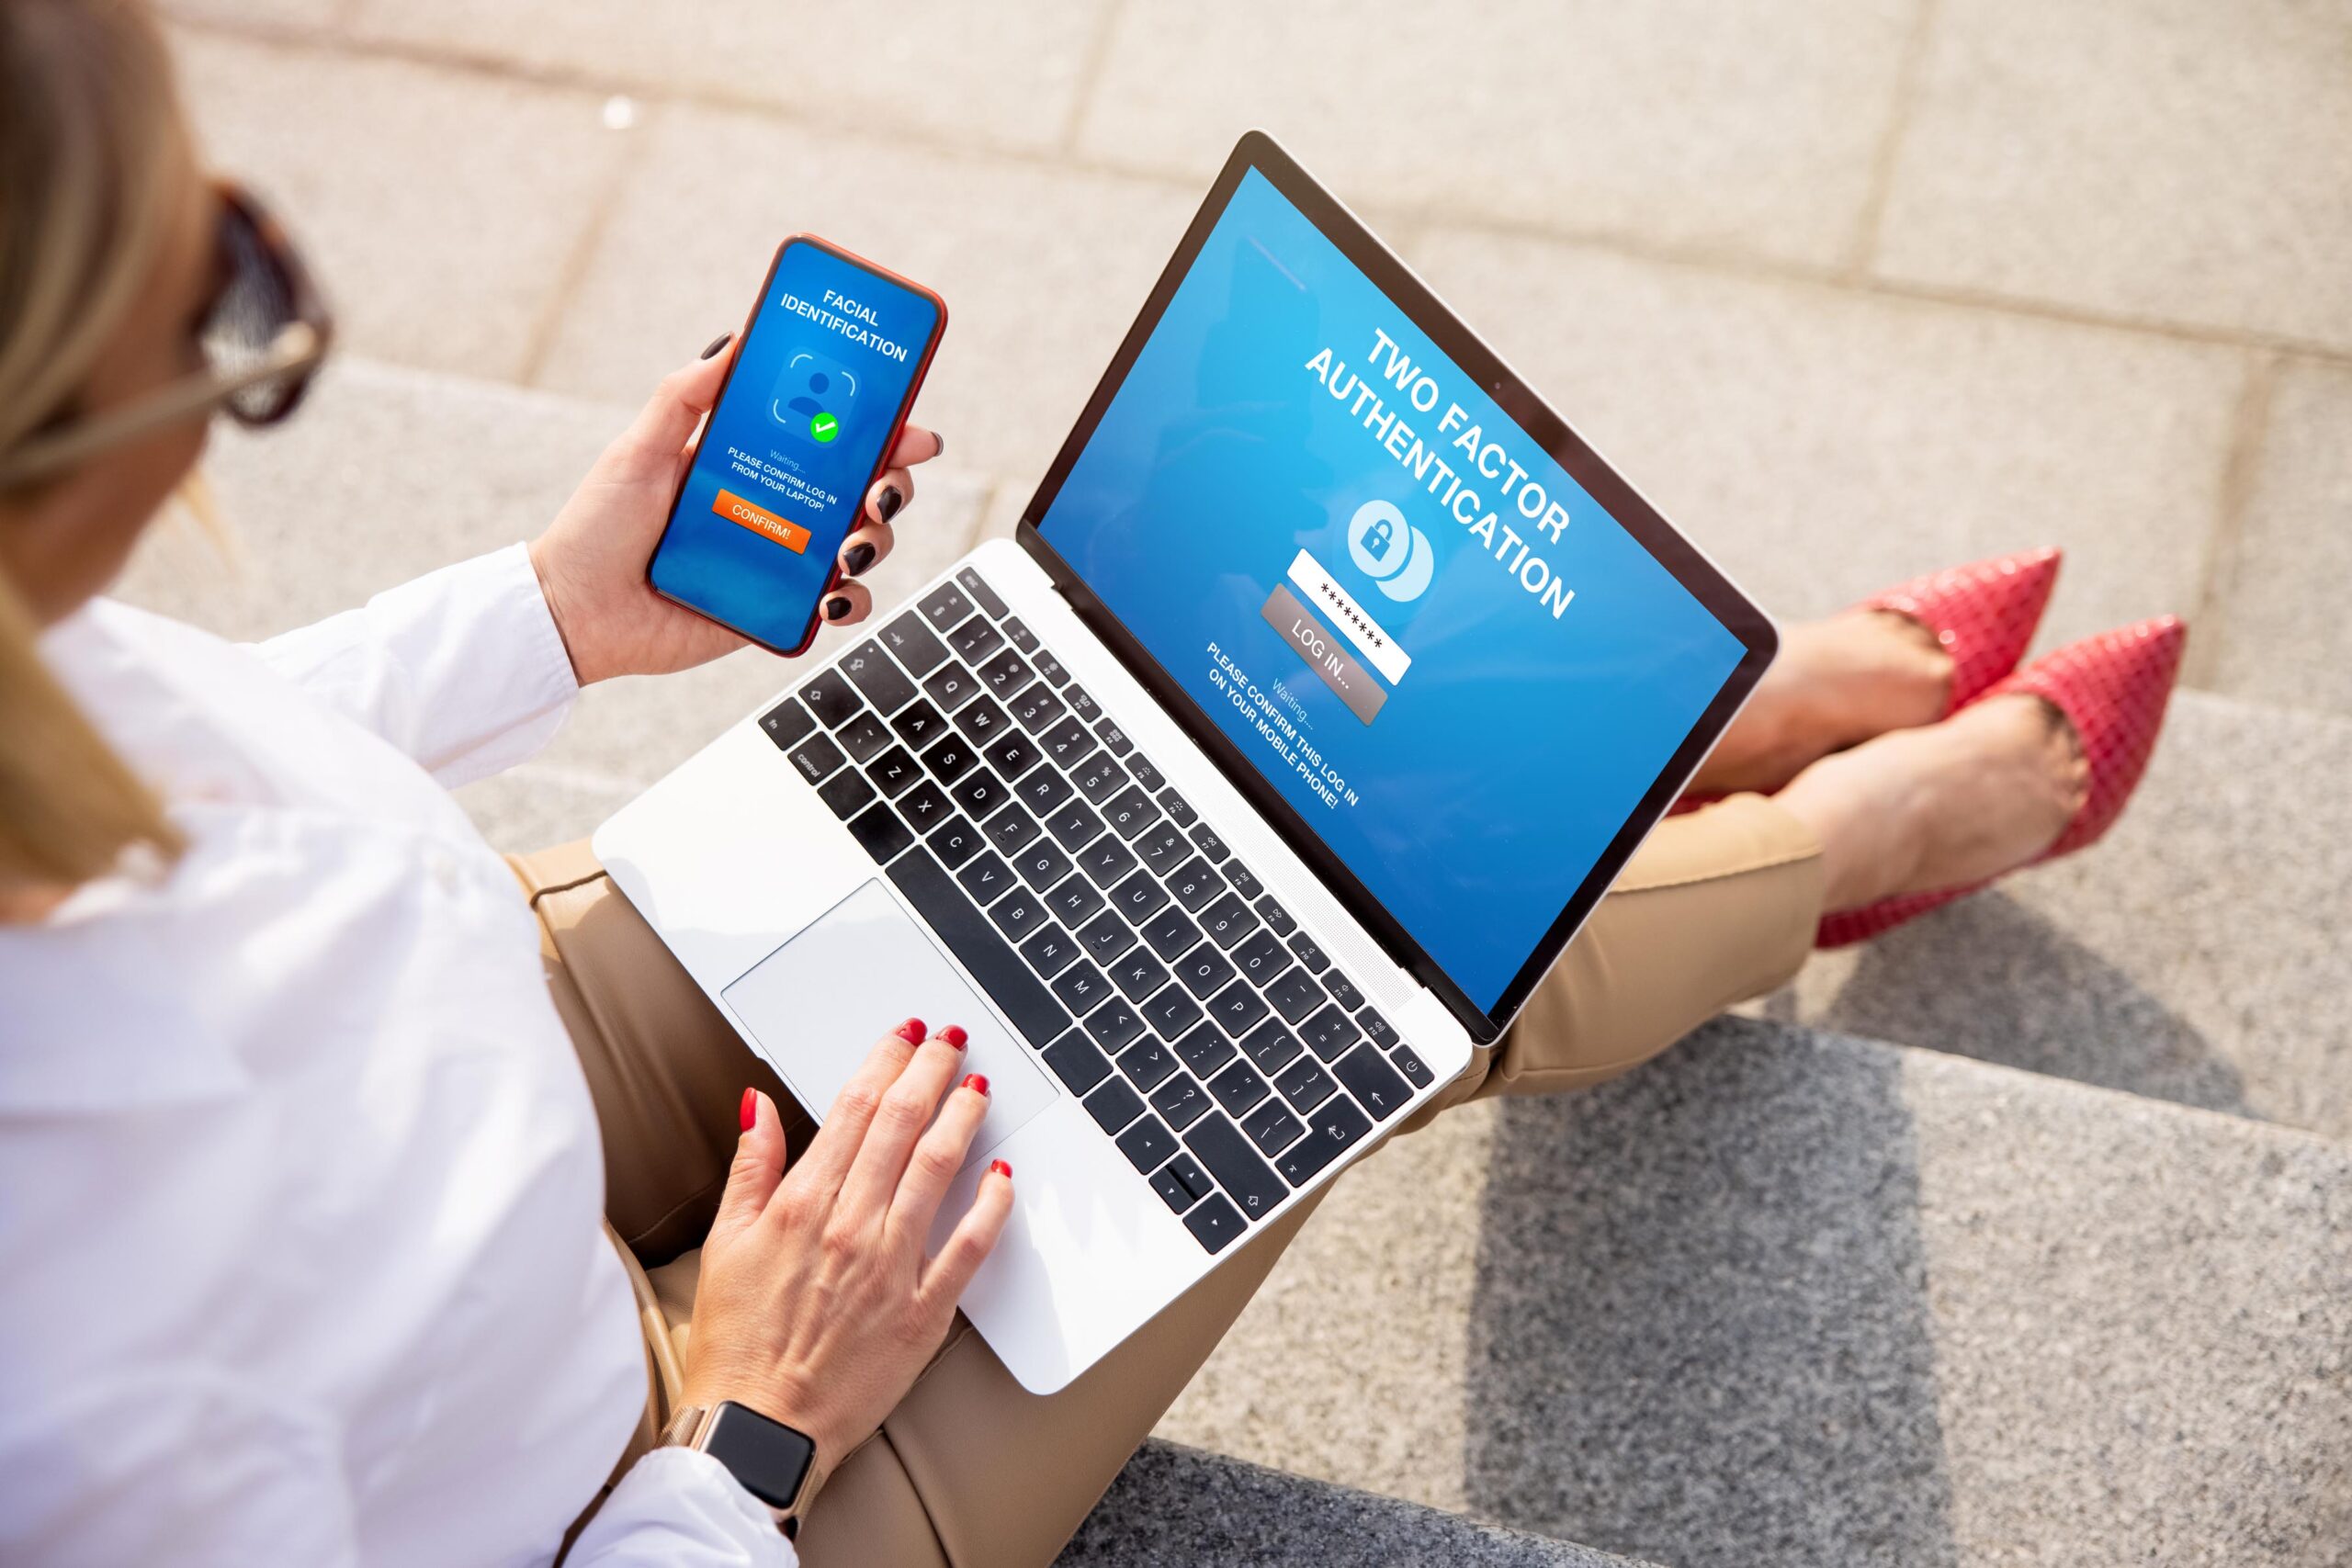 Women in business attire white shirt tan pants holding laptop and smartphone, sitting outside on steps.